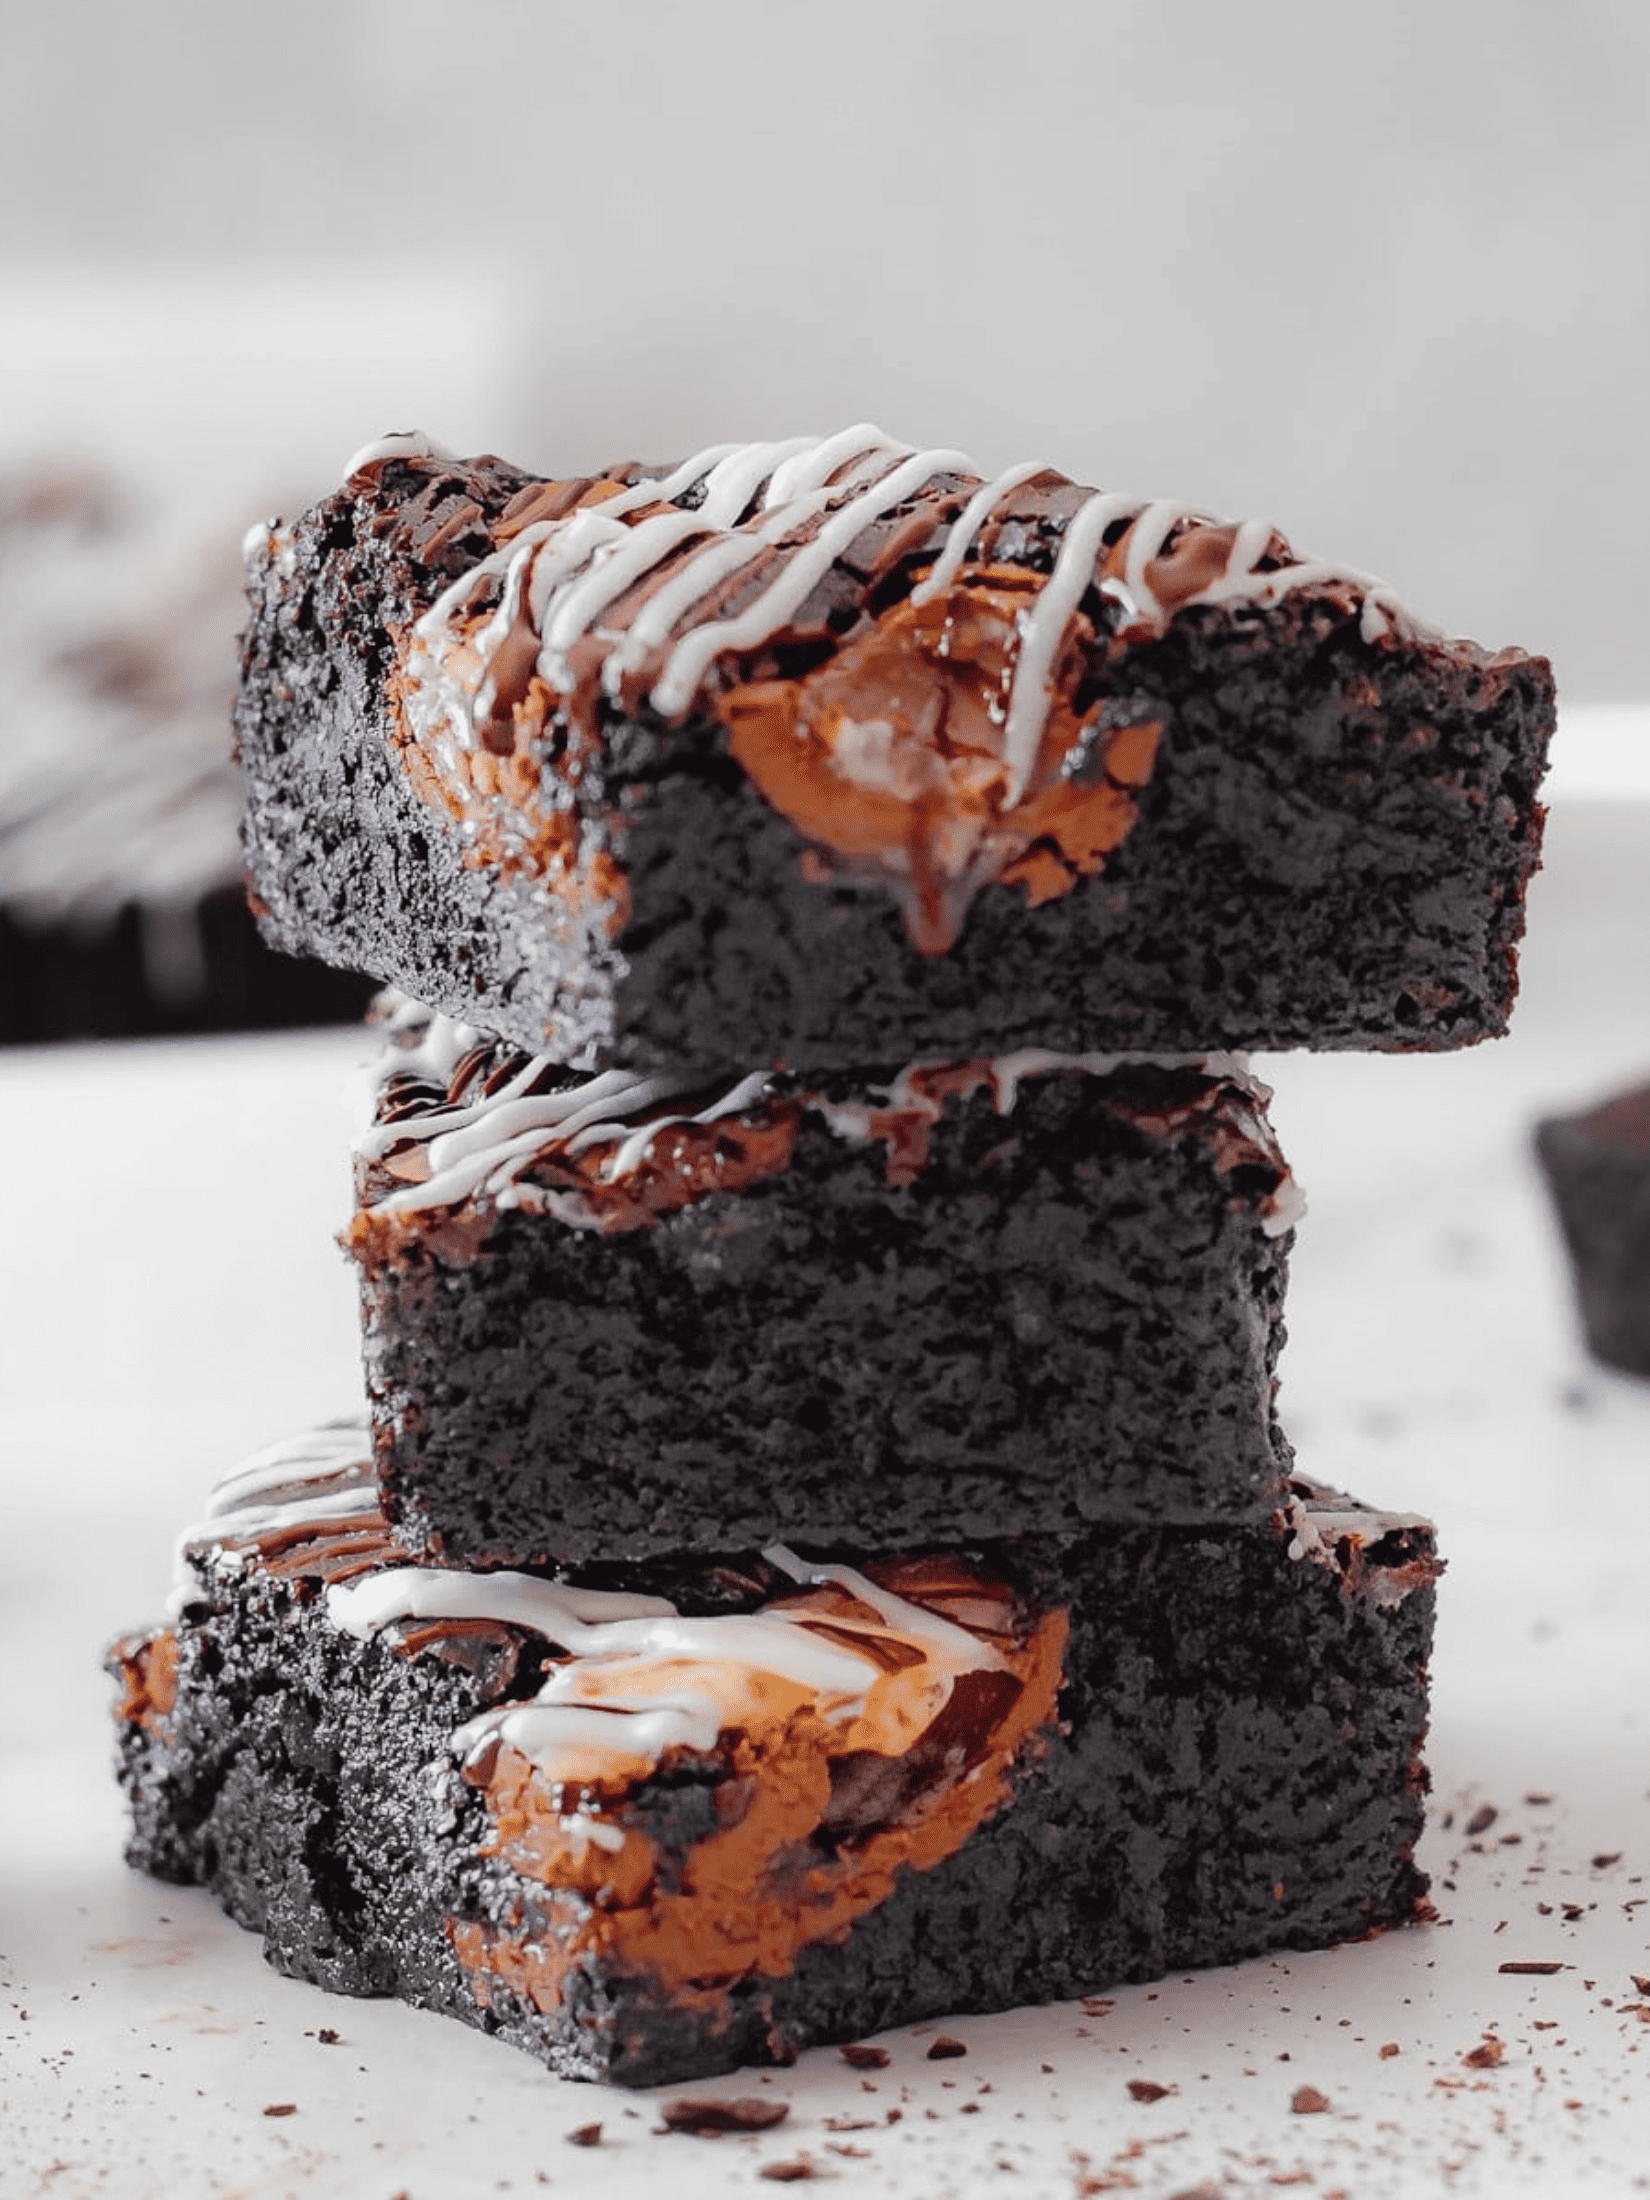 a decadent creme egg brownies, showcasing rich chocolatey layers with gooey creme egg centers.